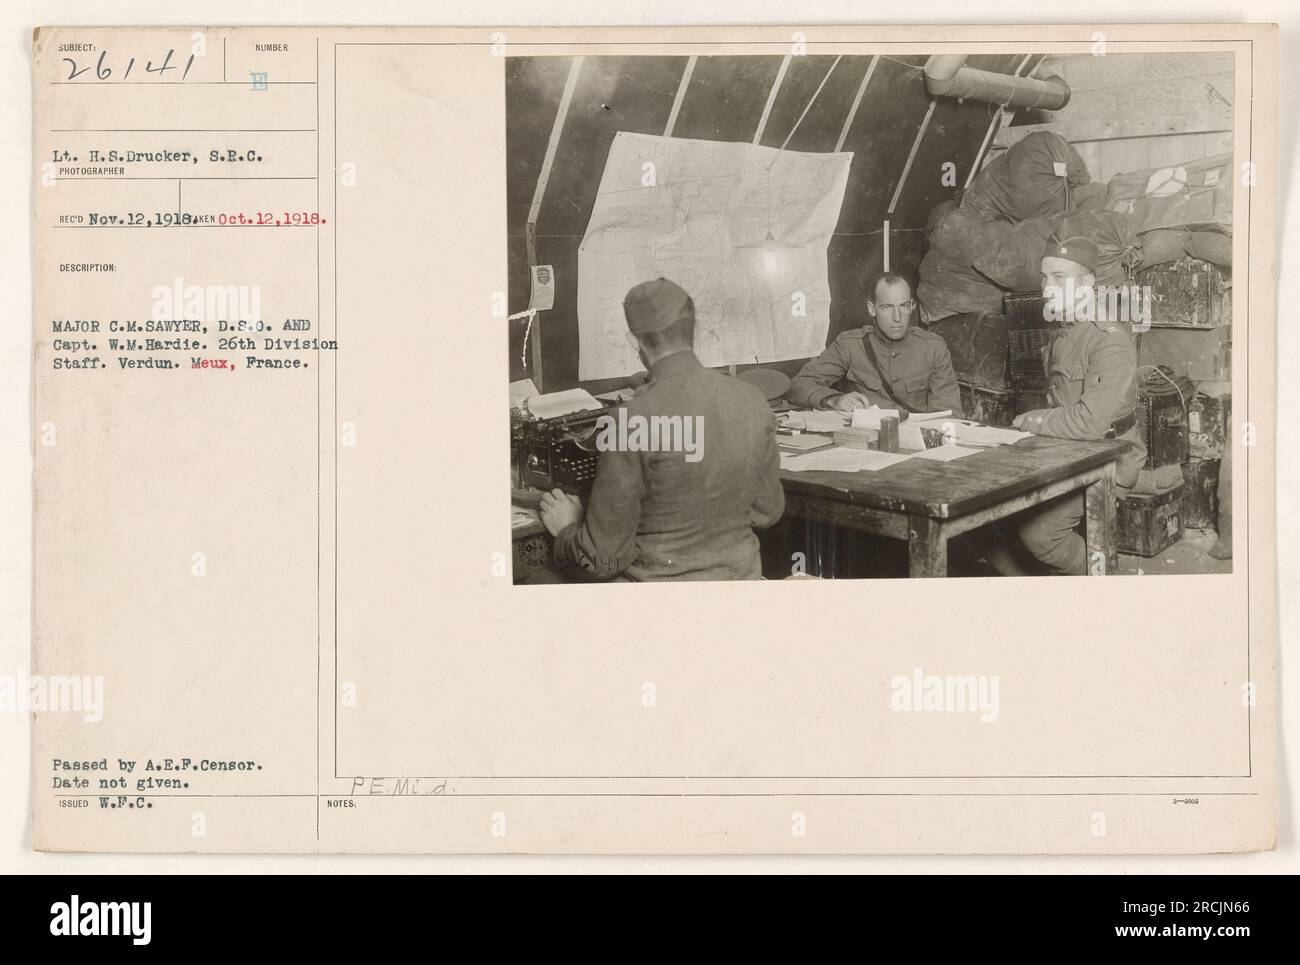 Image showing Major C.M. Sawyer, D.S.O. and Captain W.M. Hardie of the 26th Division Staff in Verdun, Meux, France during World War One. Date of the photograph and photographer's information provided. Censorship approval and issuance by W.F.C. PEMIA noted. Stock Photo